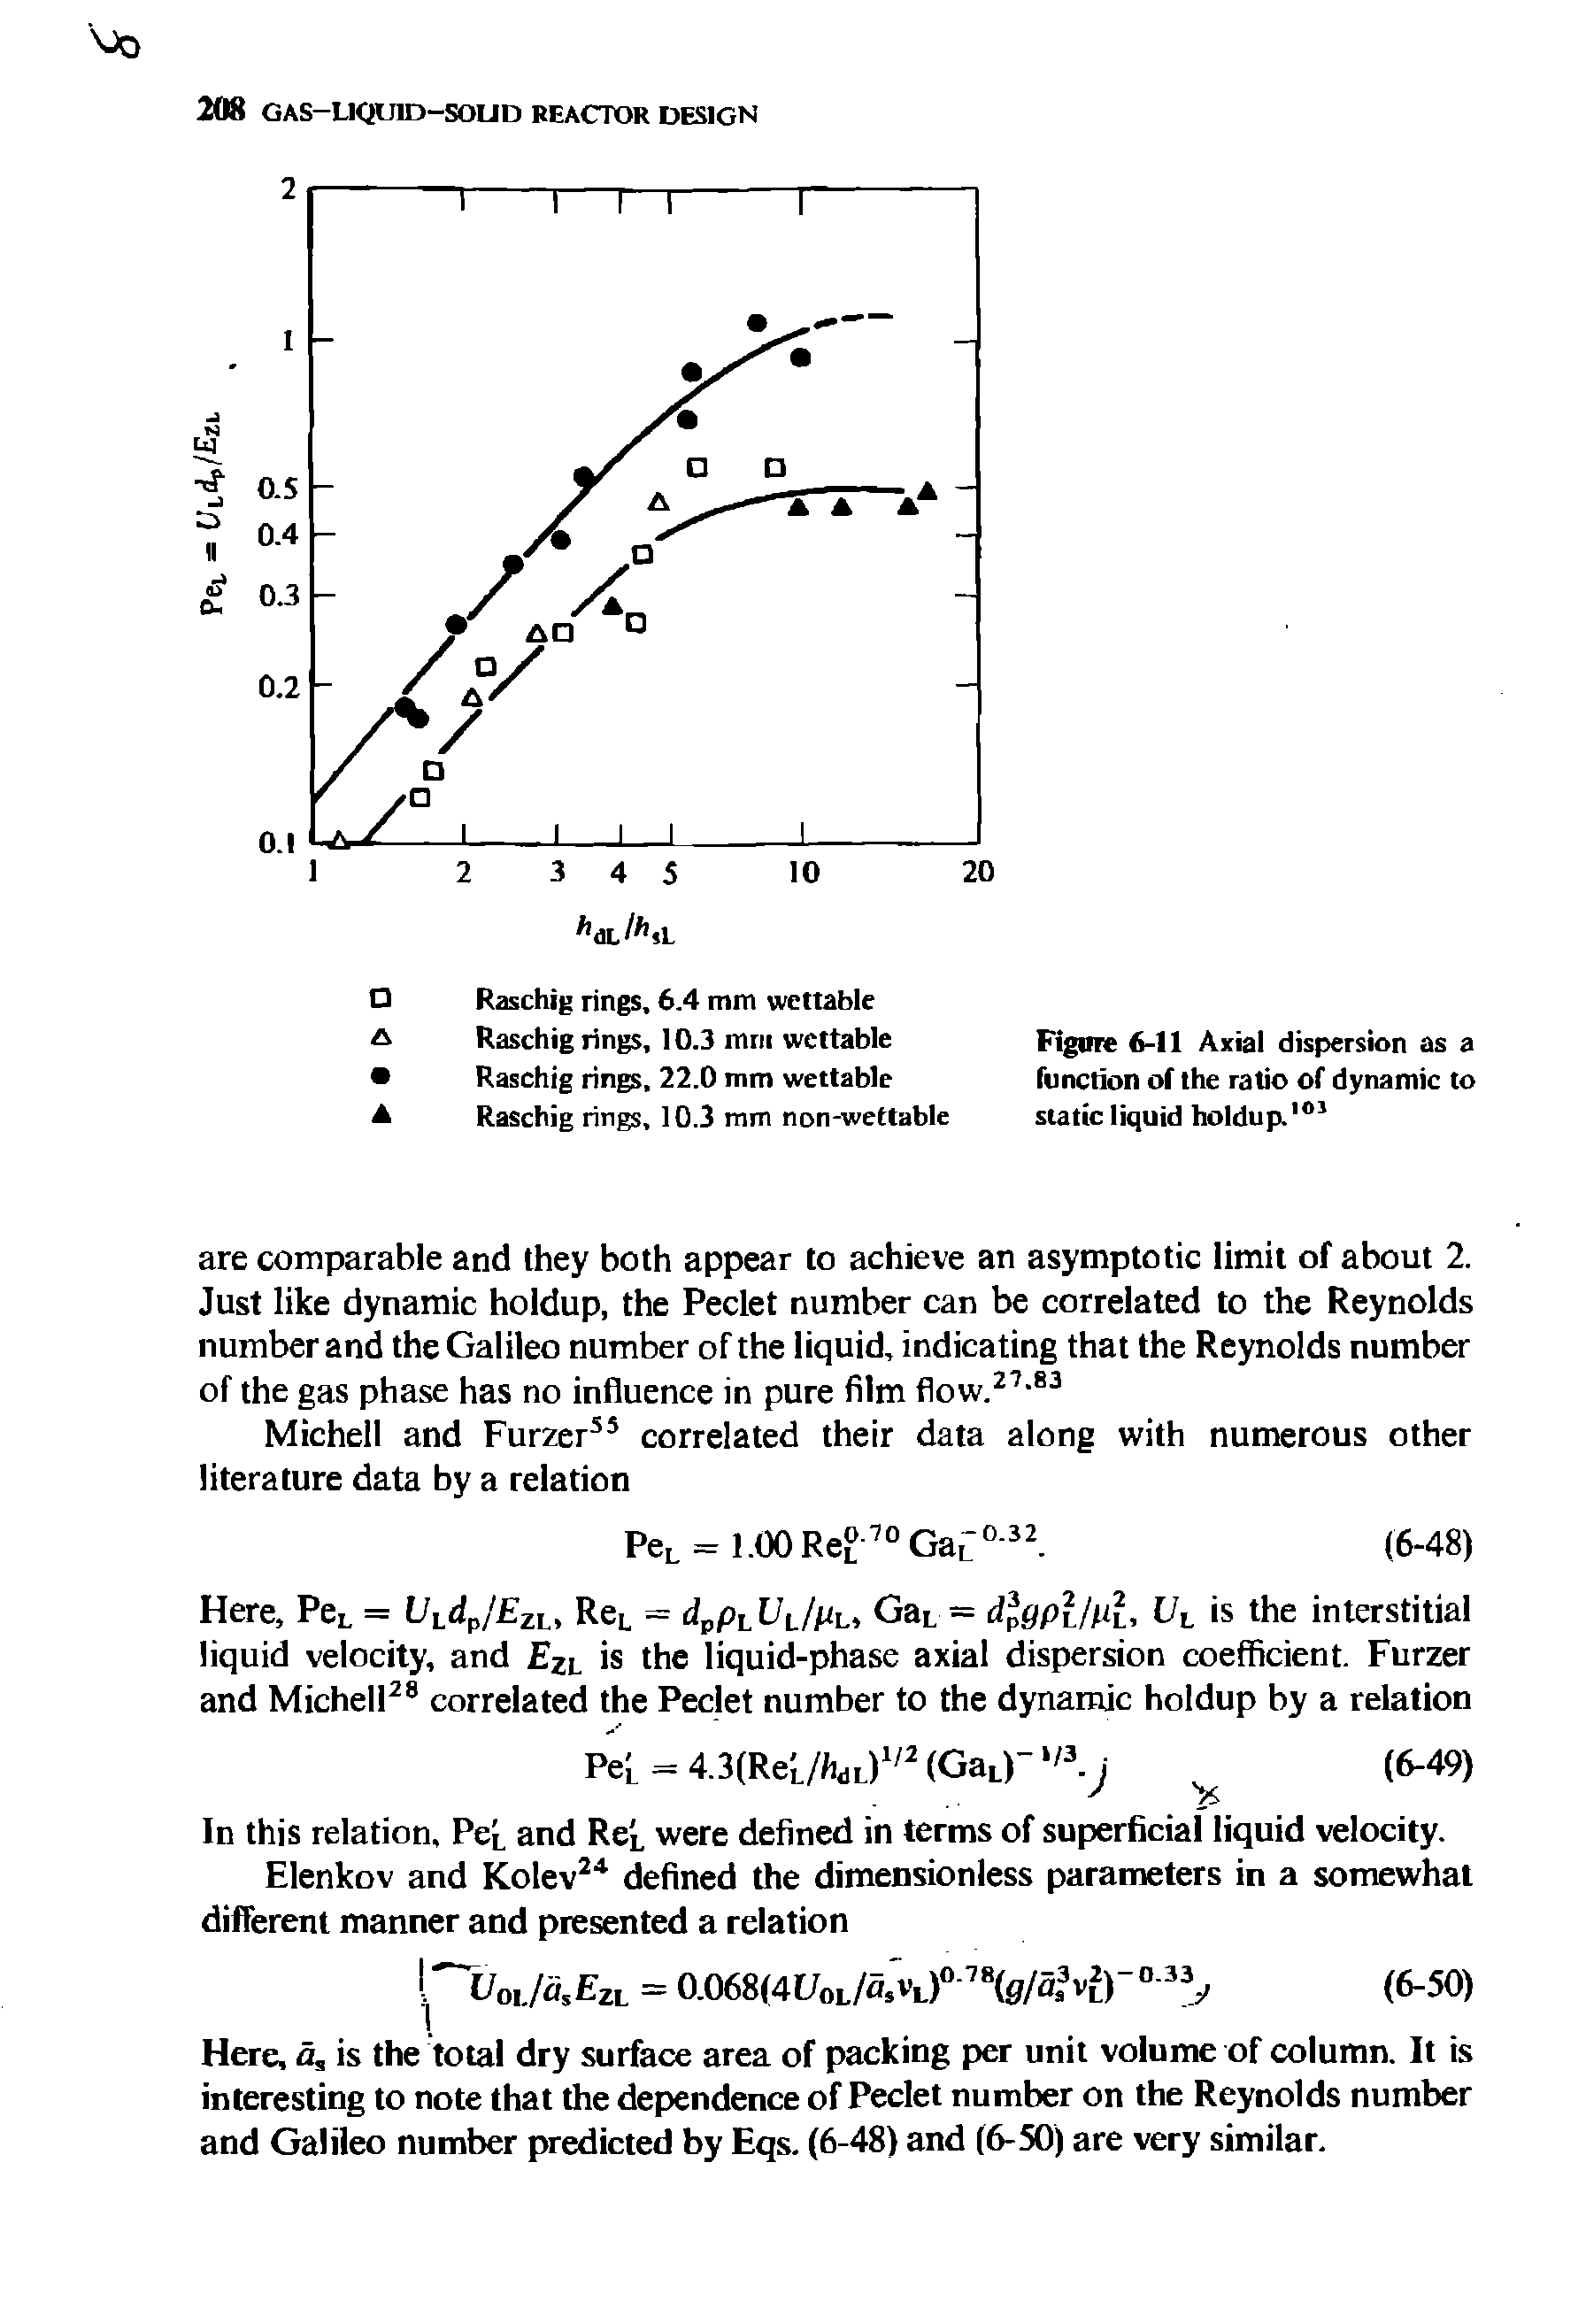 Figure 6-11 Axial dispersion as a function of the ratio of dynamic to static liquid holdup.101...